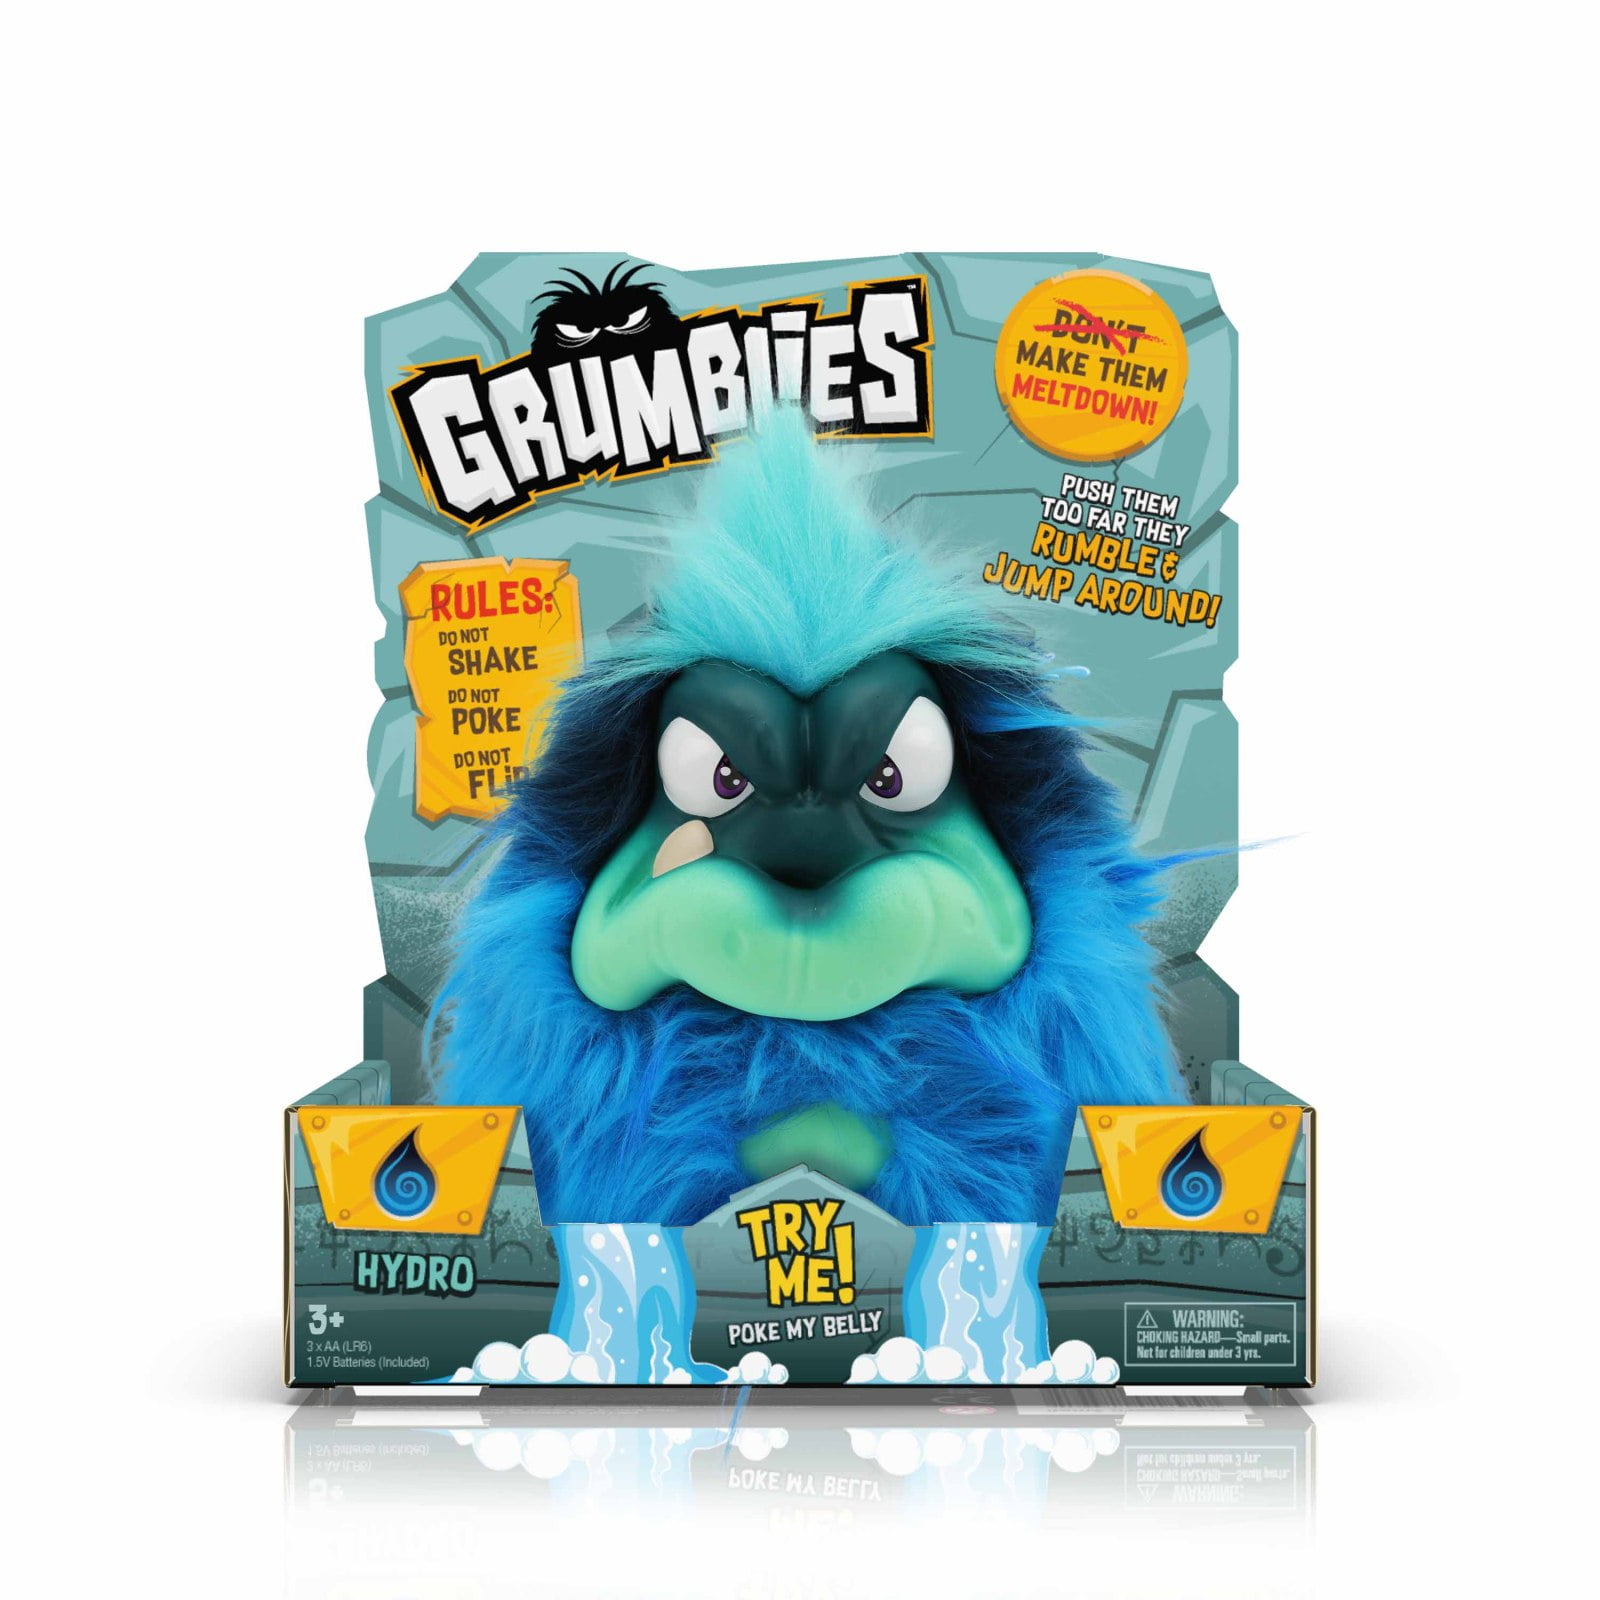 Grumblies New toy ages 3 and up 40 reactions & sounds Mojo blue and yellow 